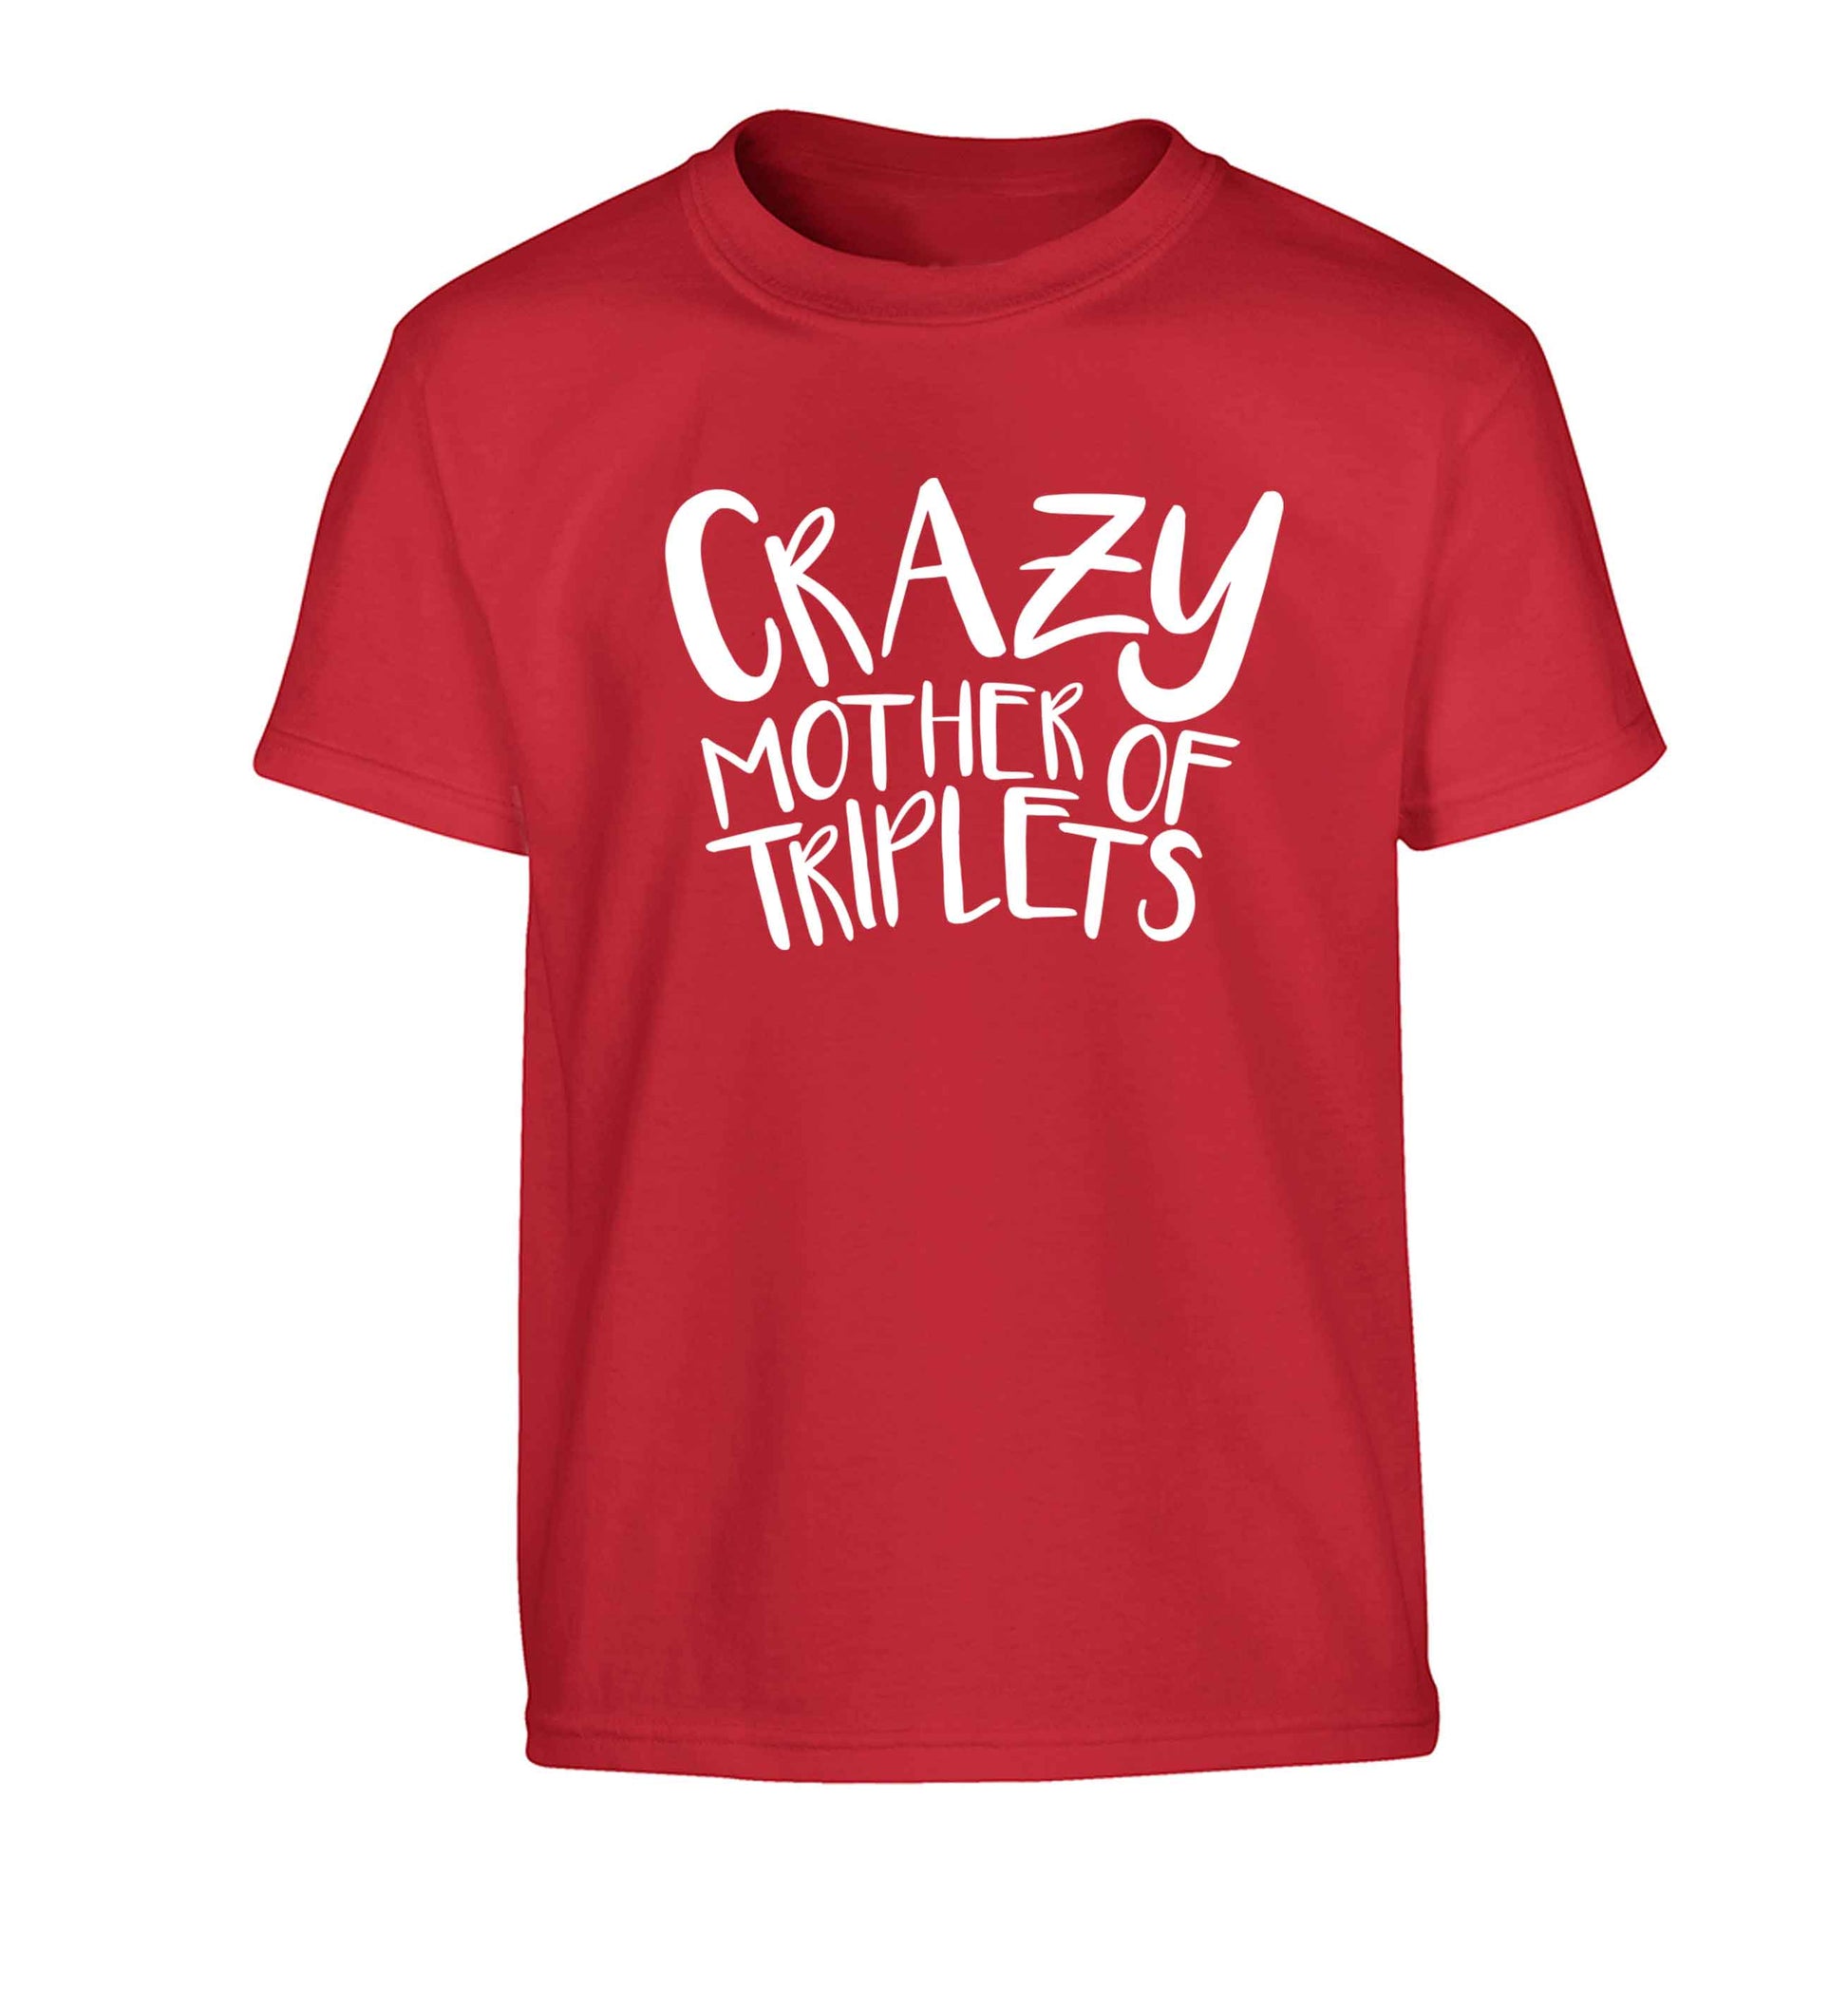 Crazy mother of triplets Children's red Tshirt 12-13 Years